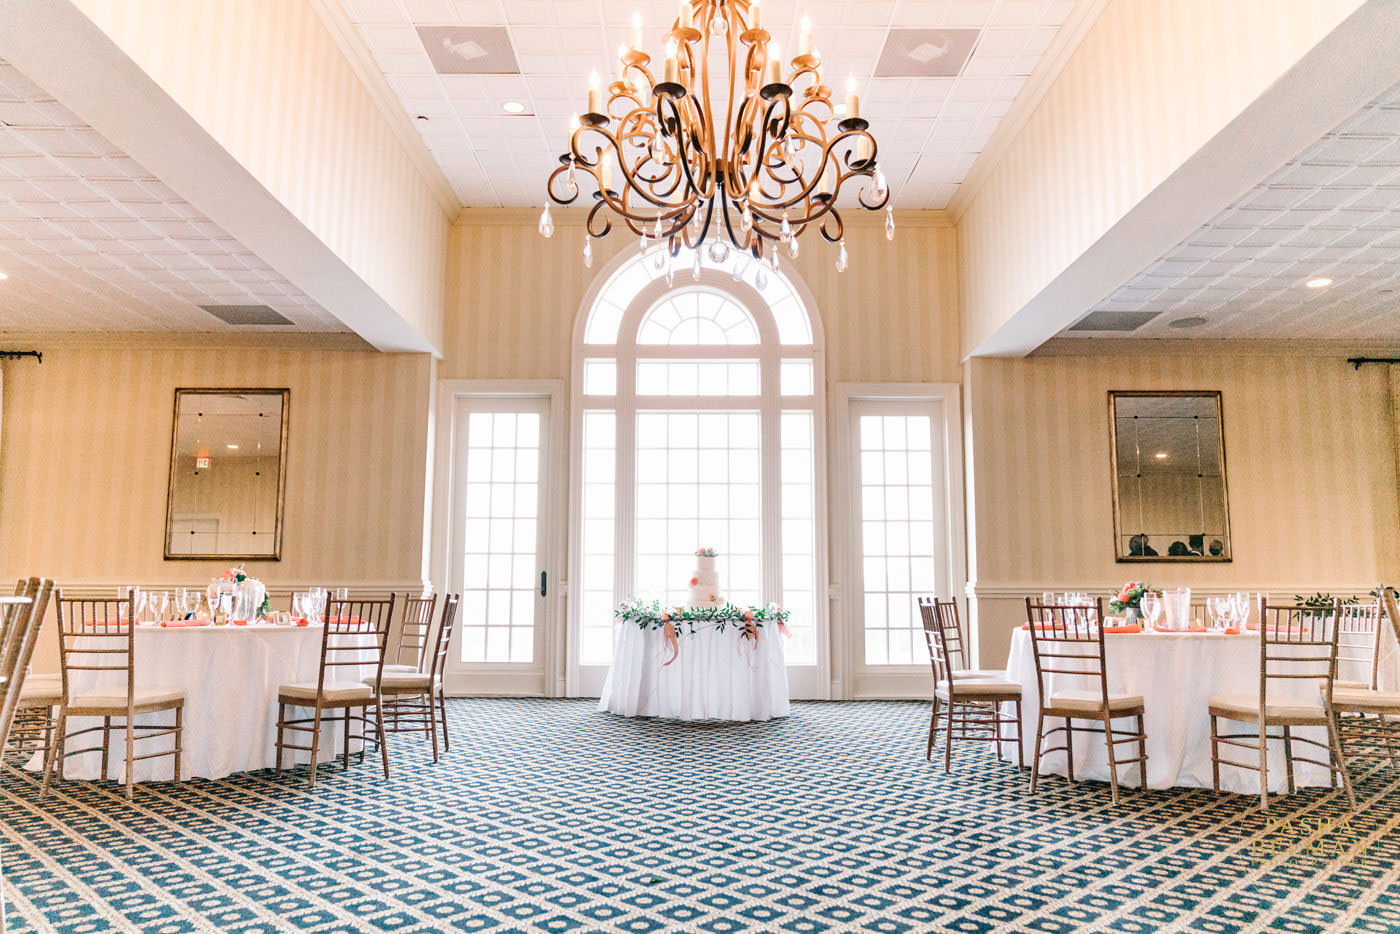 An Intimate Debordieu Club Wedding in Georgetown by Top Wedding PHotographers at Pasha Belman Photography